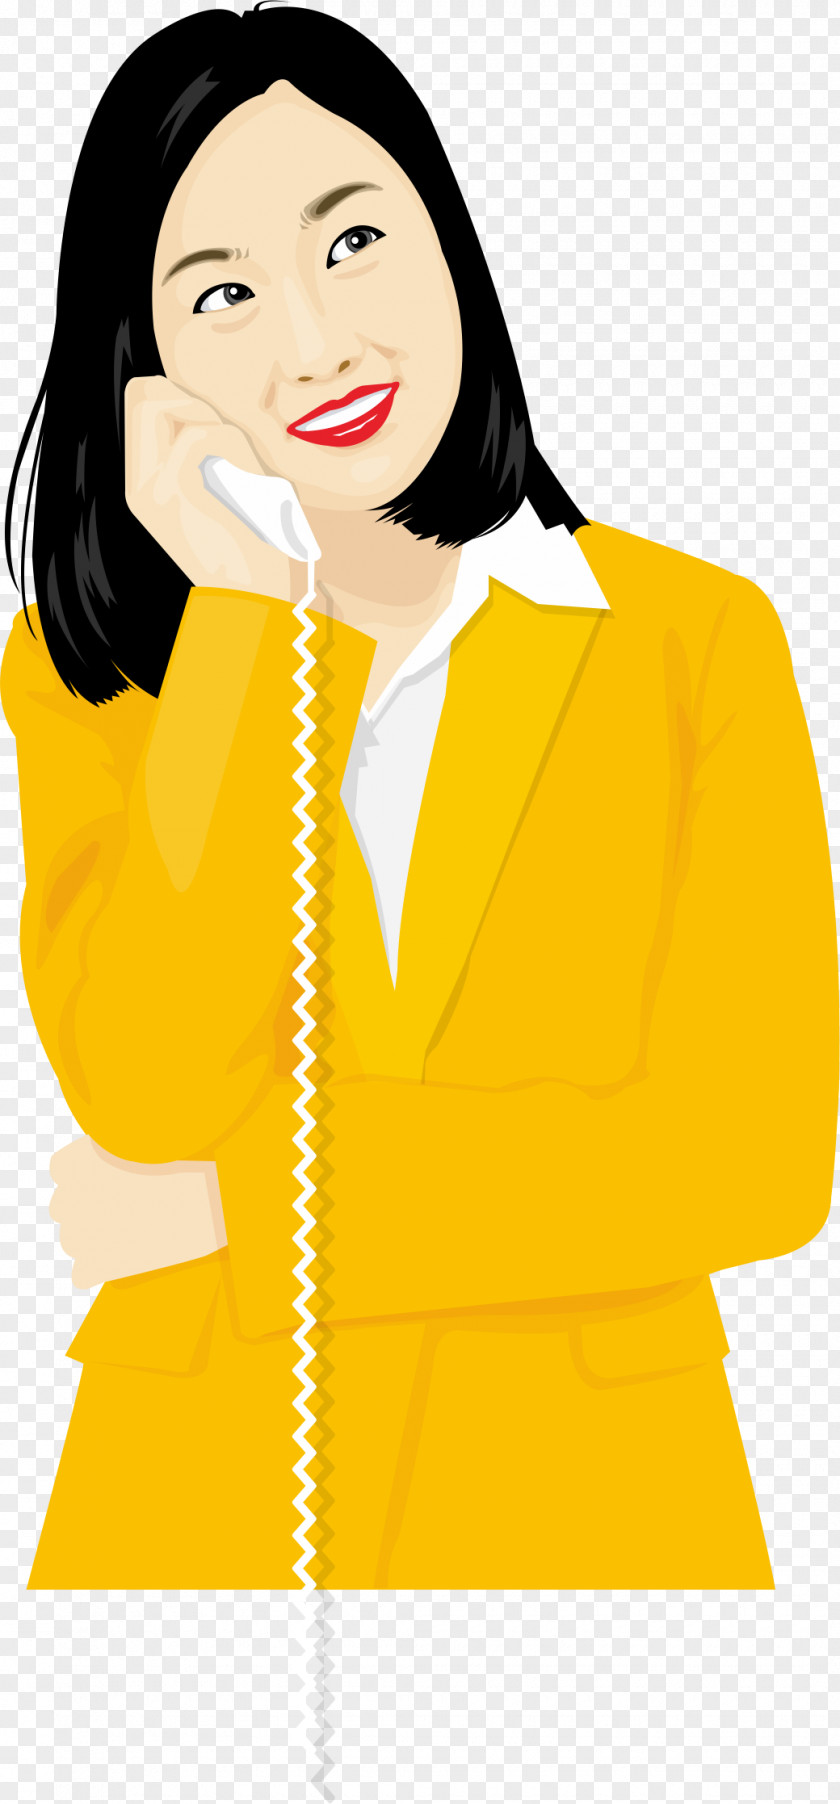 Woman Telephone Girl Illustration PNG Illustration, Call the girl clipart PNG